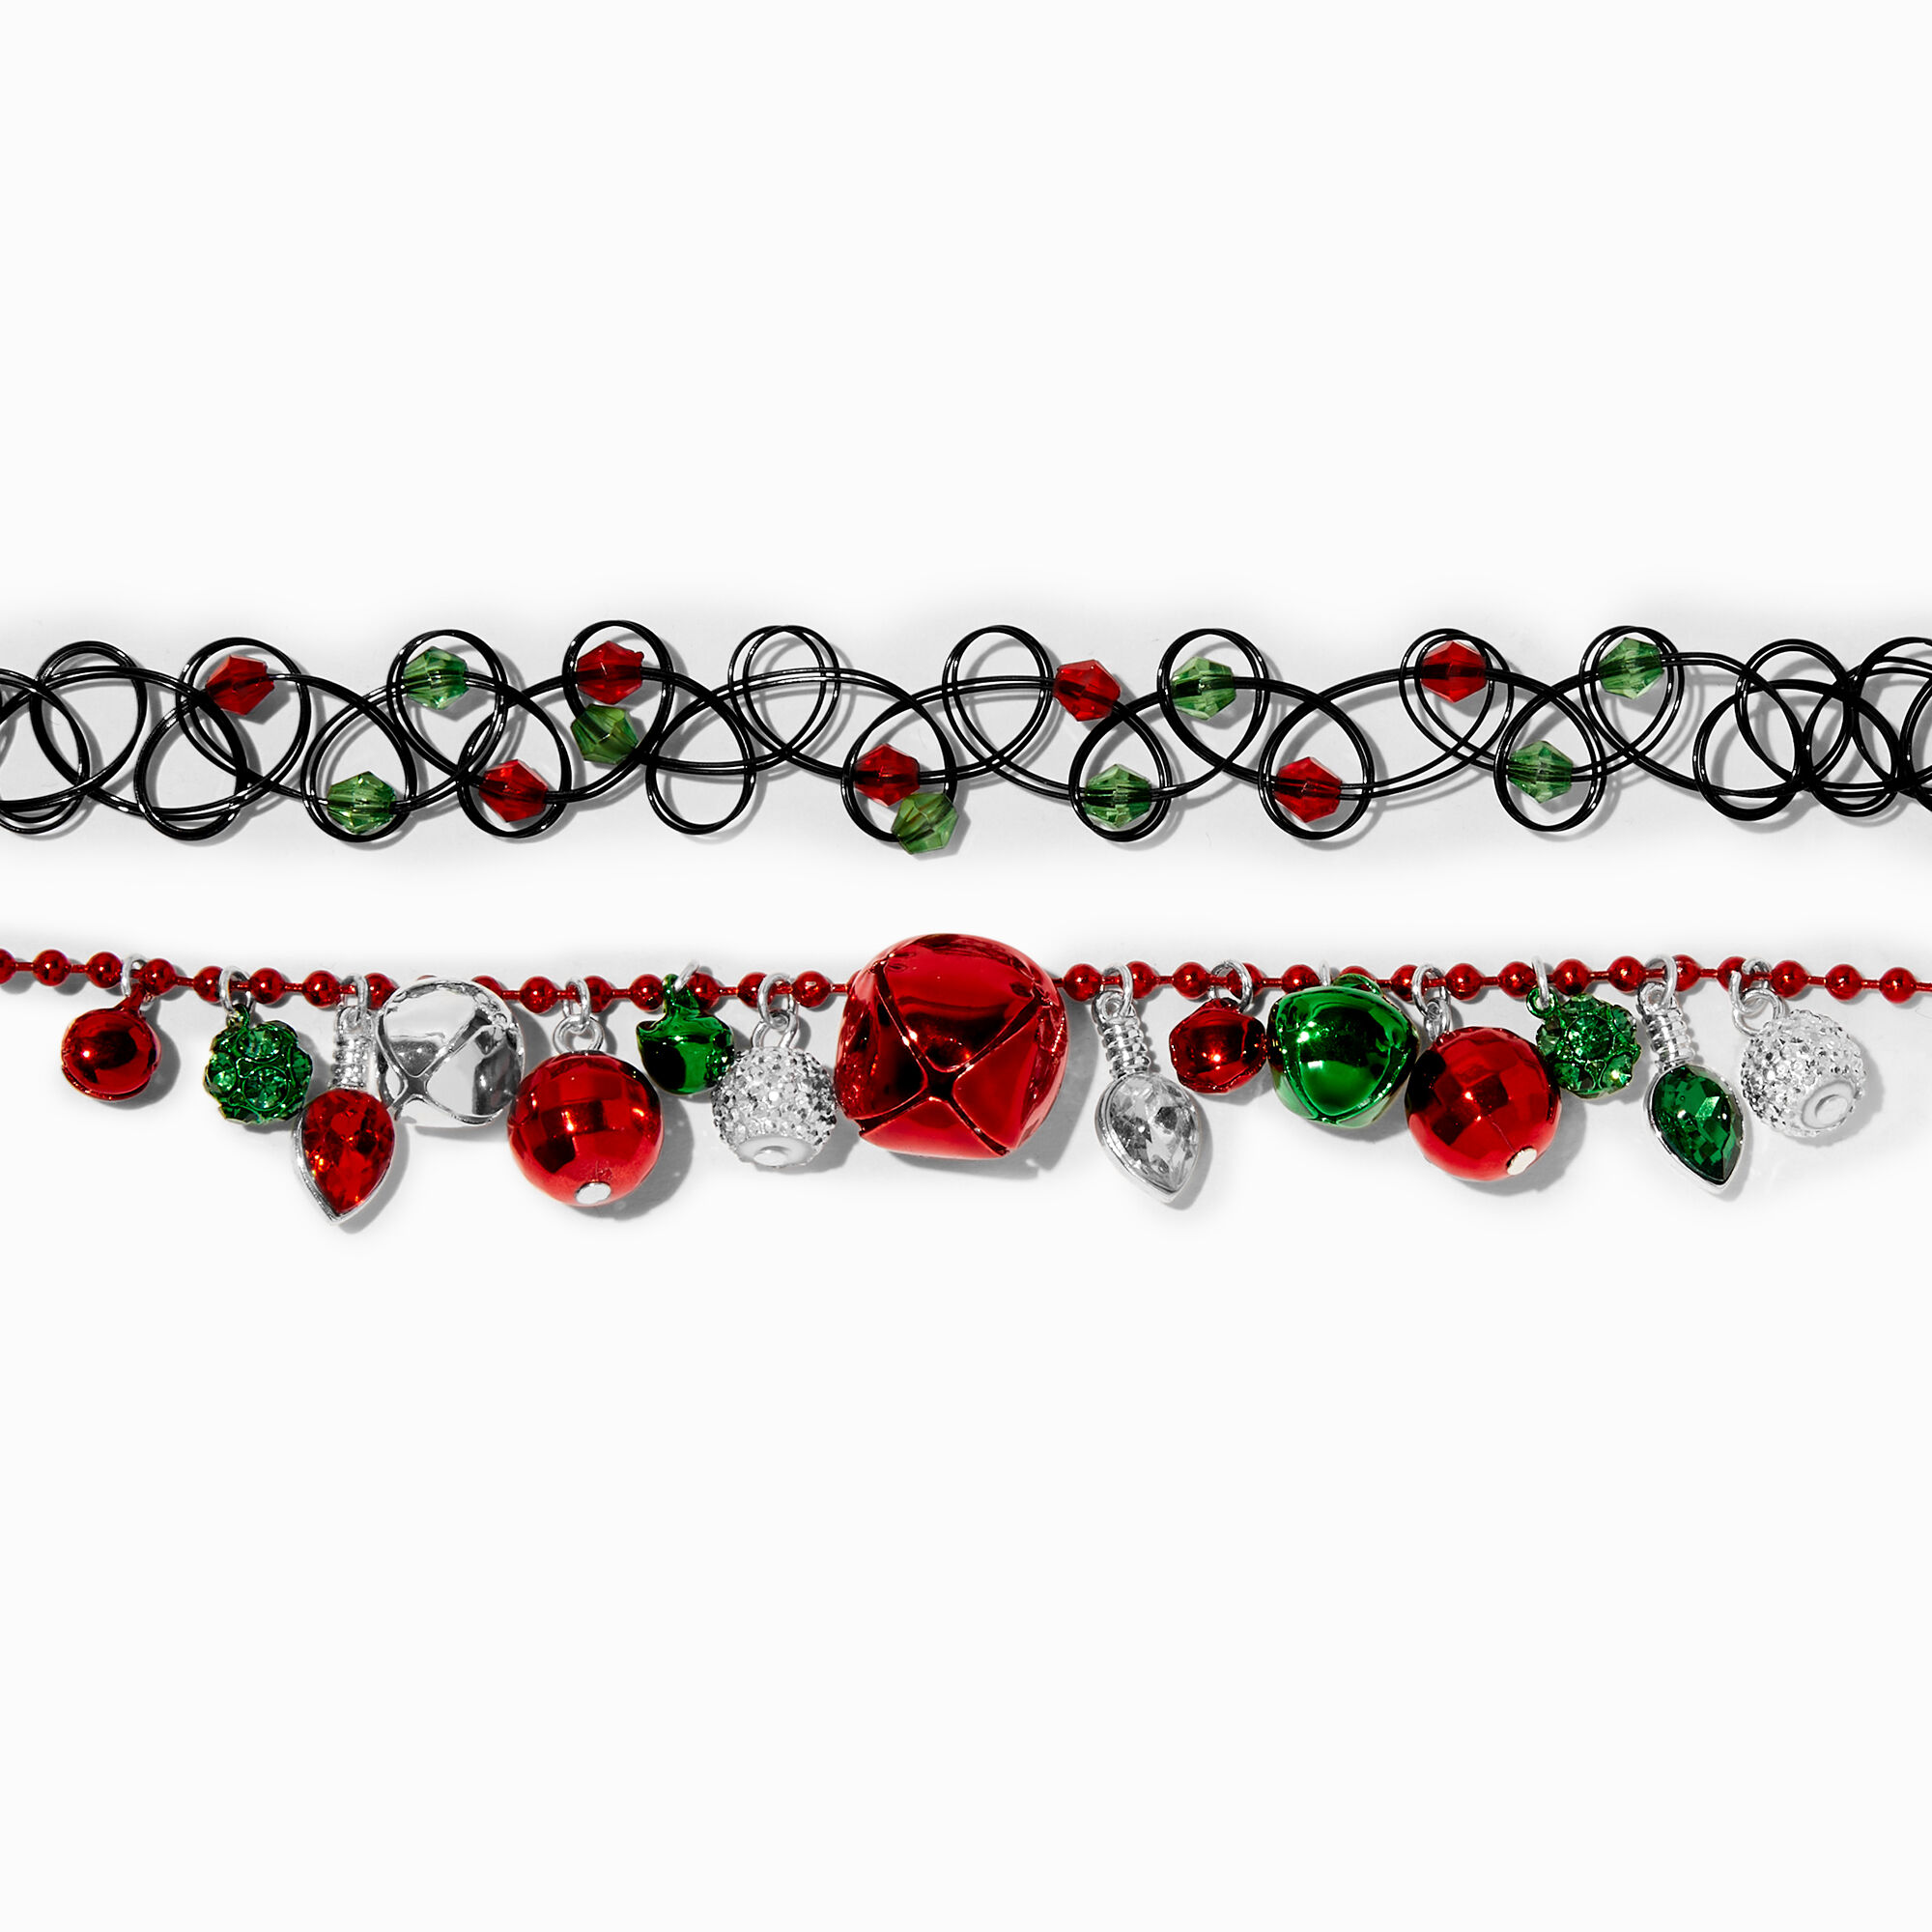 View Claires Green Jingle Bells Choker Necklace Set 2 Pack Red information